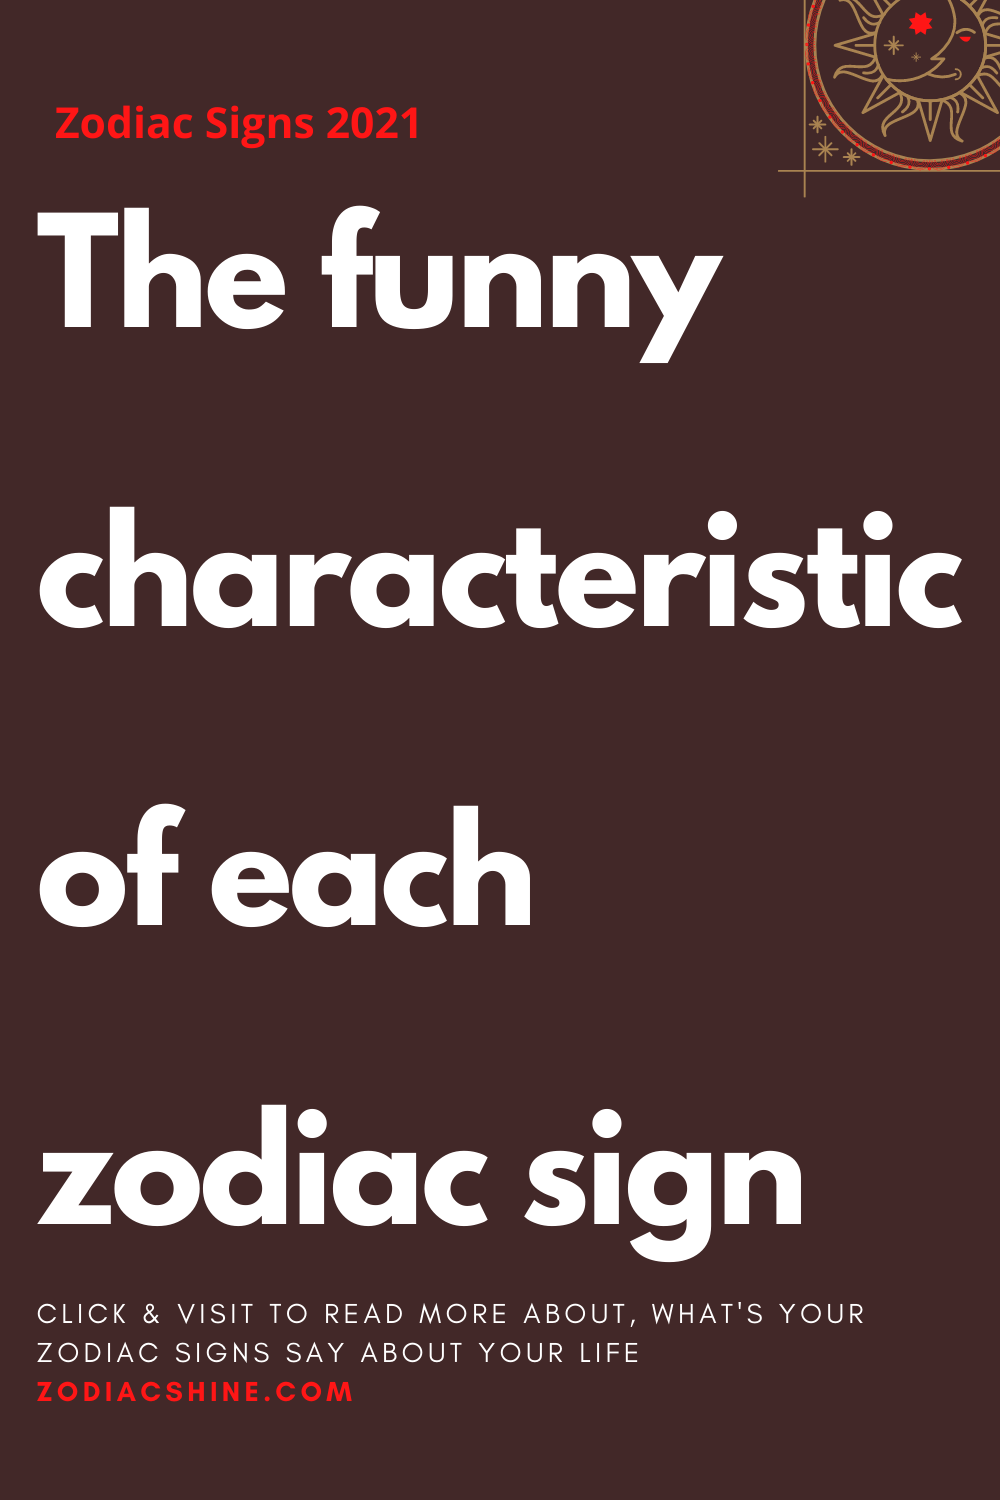 The funny characteristic of each zodiac sign